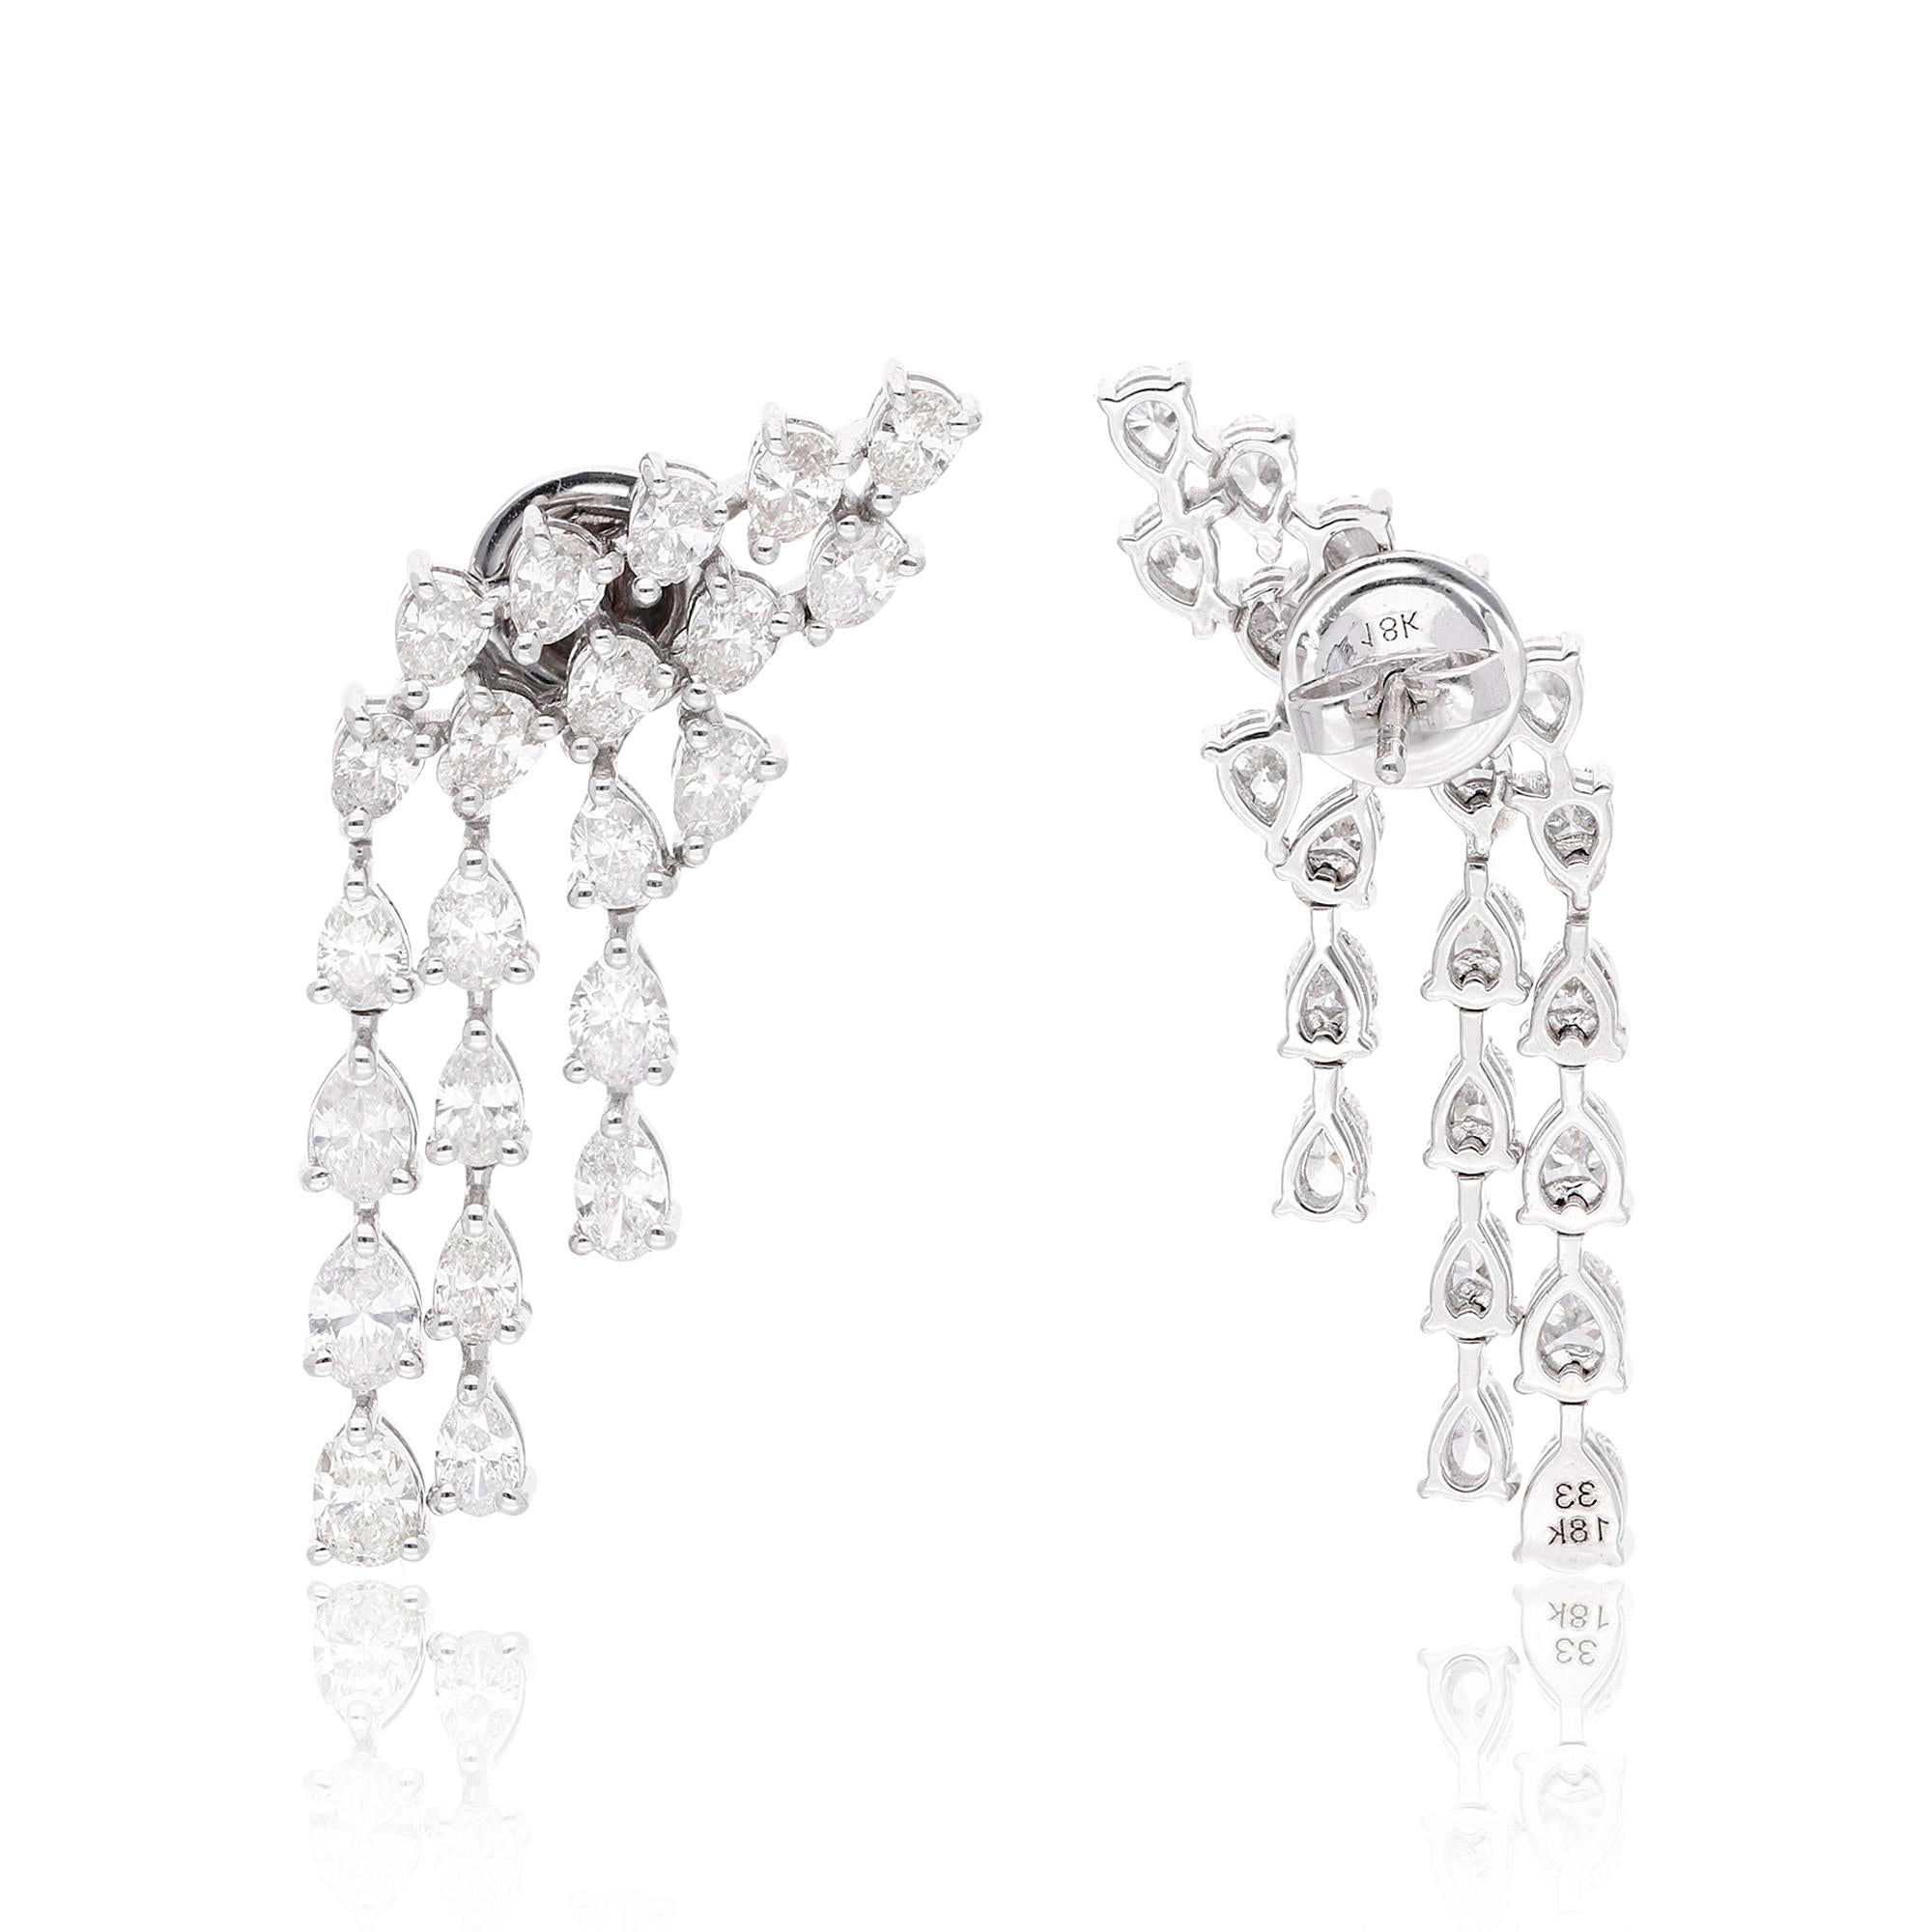 Make your special day even more magical with these exquisite Chandelier Diamond Earrings, handcrafted with love. The intricate detailing and expert craftsmanship ensure that these earrings are not only beautiful, but also durable and